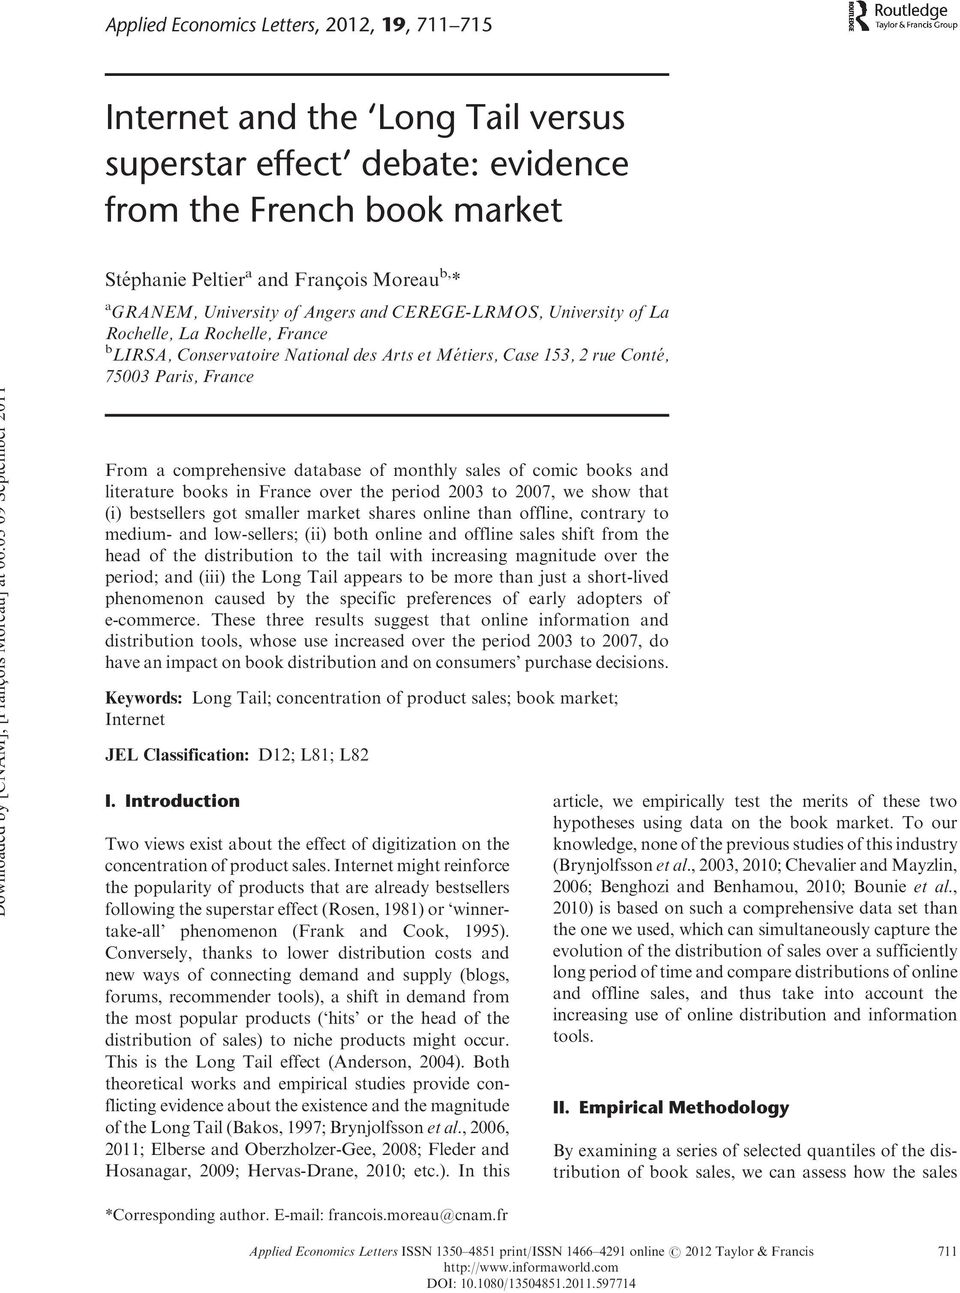 comprehensive database of monthly sales of comic books and literature books in France over the period 2003 to 2007, we show that (i) bestsellers got smaller market shares online than offline,